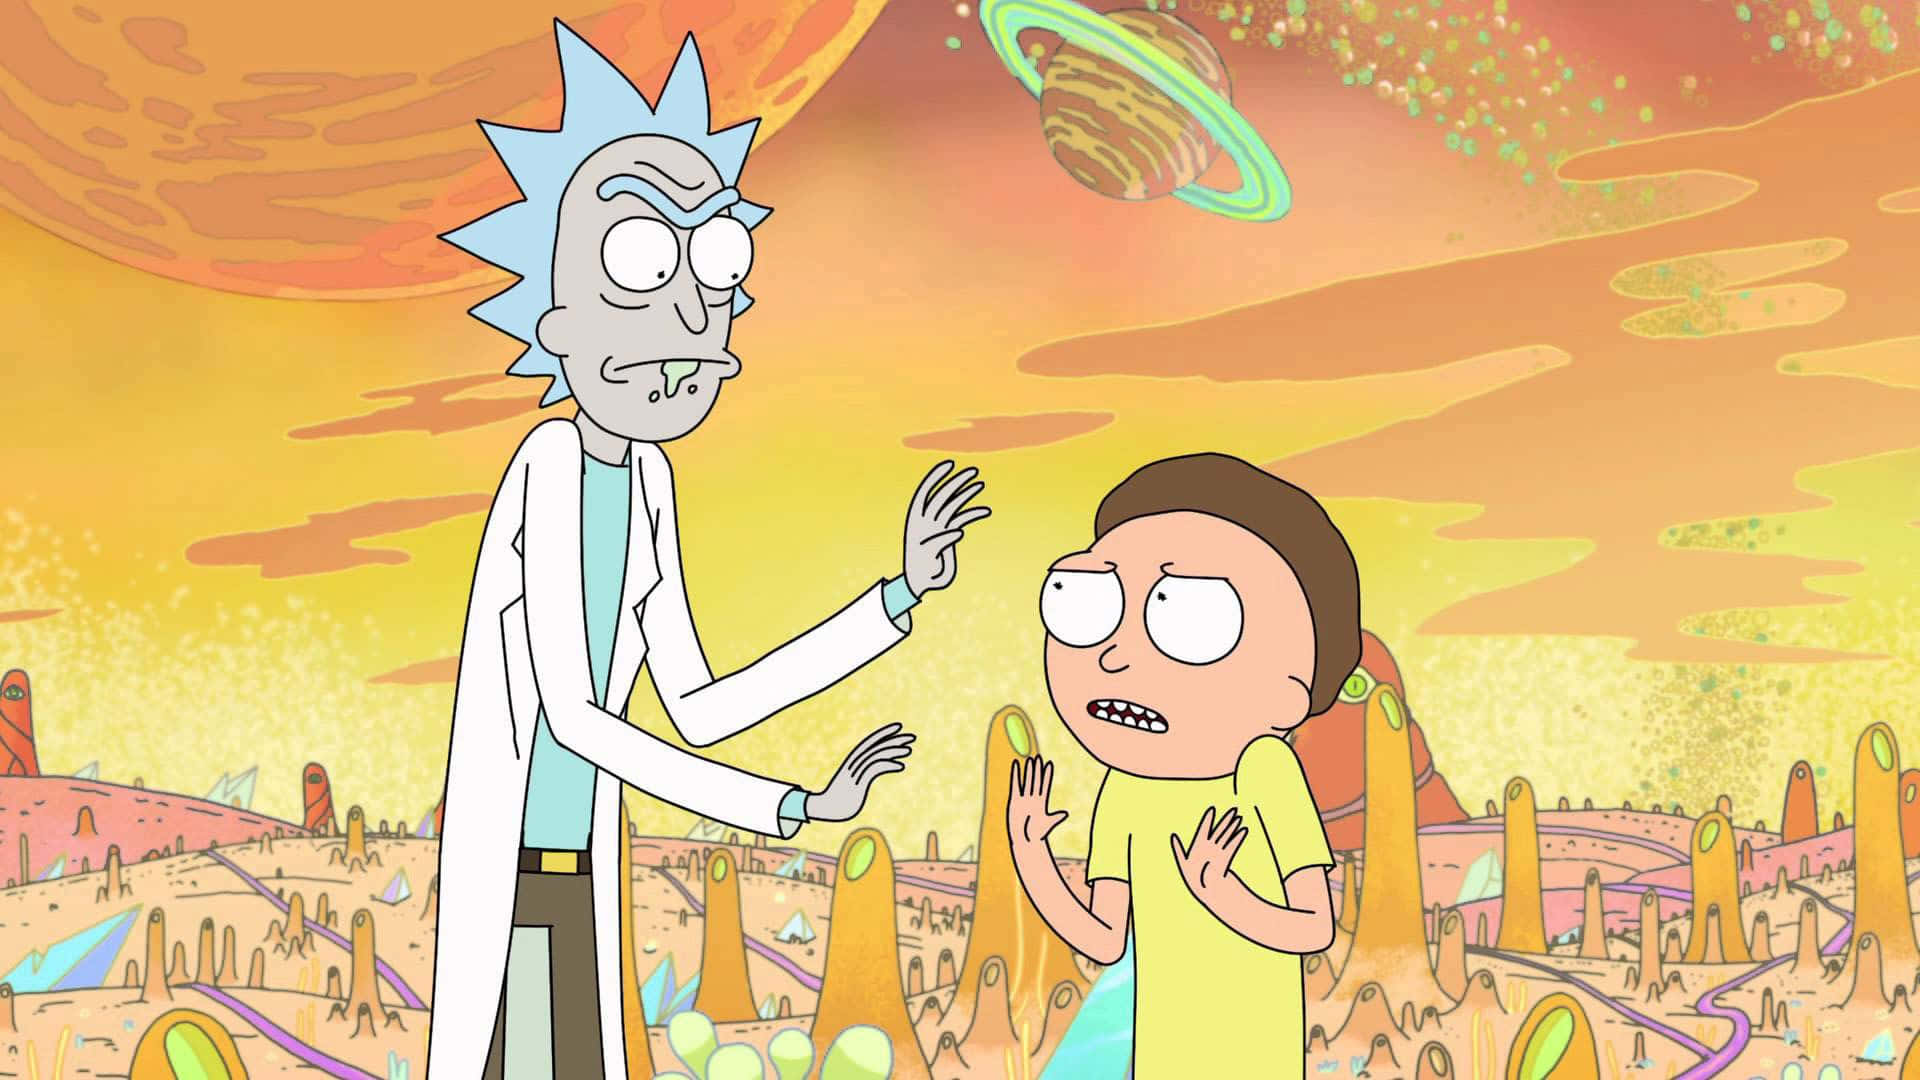 "Rick and Morty Face Off in an Interdimensional Caper" Wallpaper